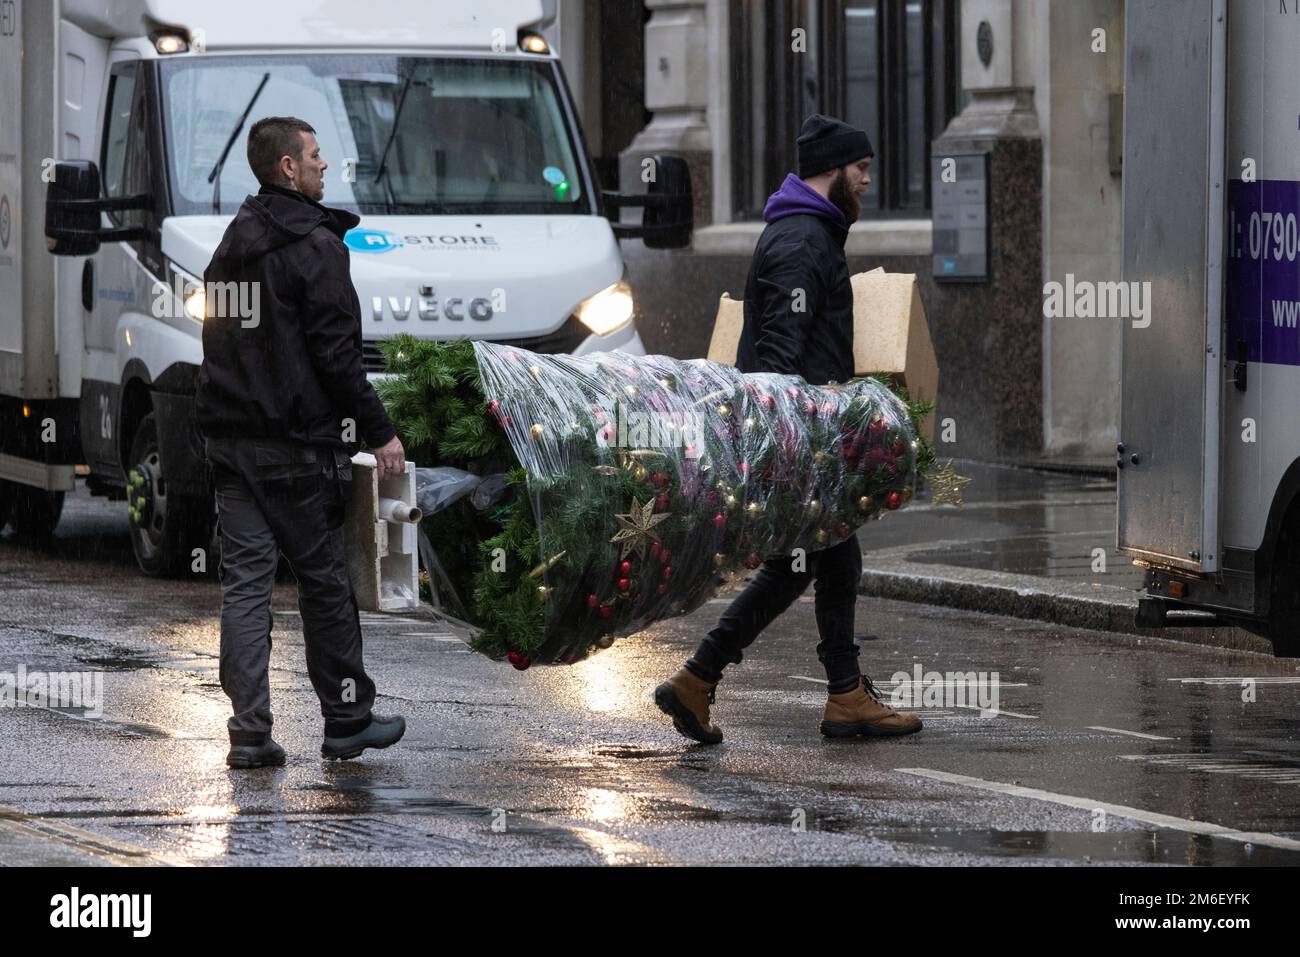 Removals workers carry a wrapped Christmas tree after retrieving it from an office building on the first day back in the New Year, City of London, UK Stock Photo